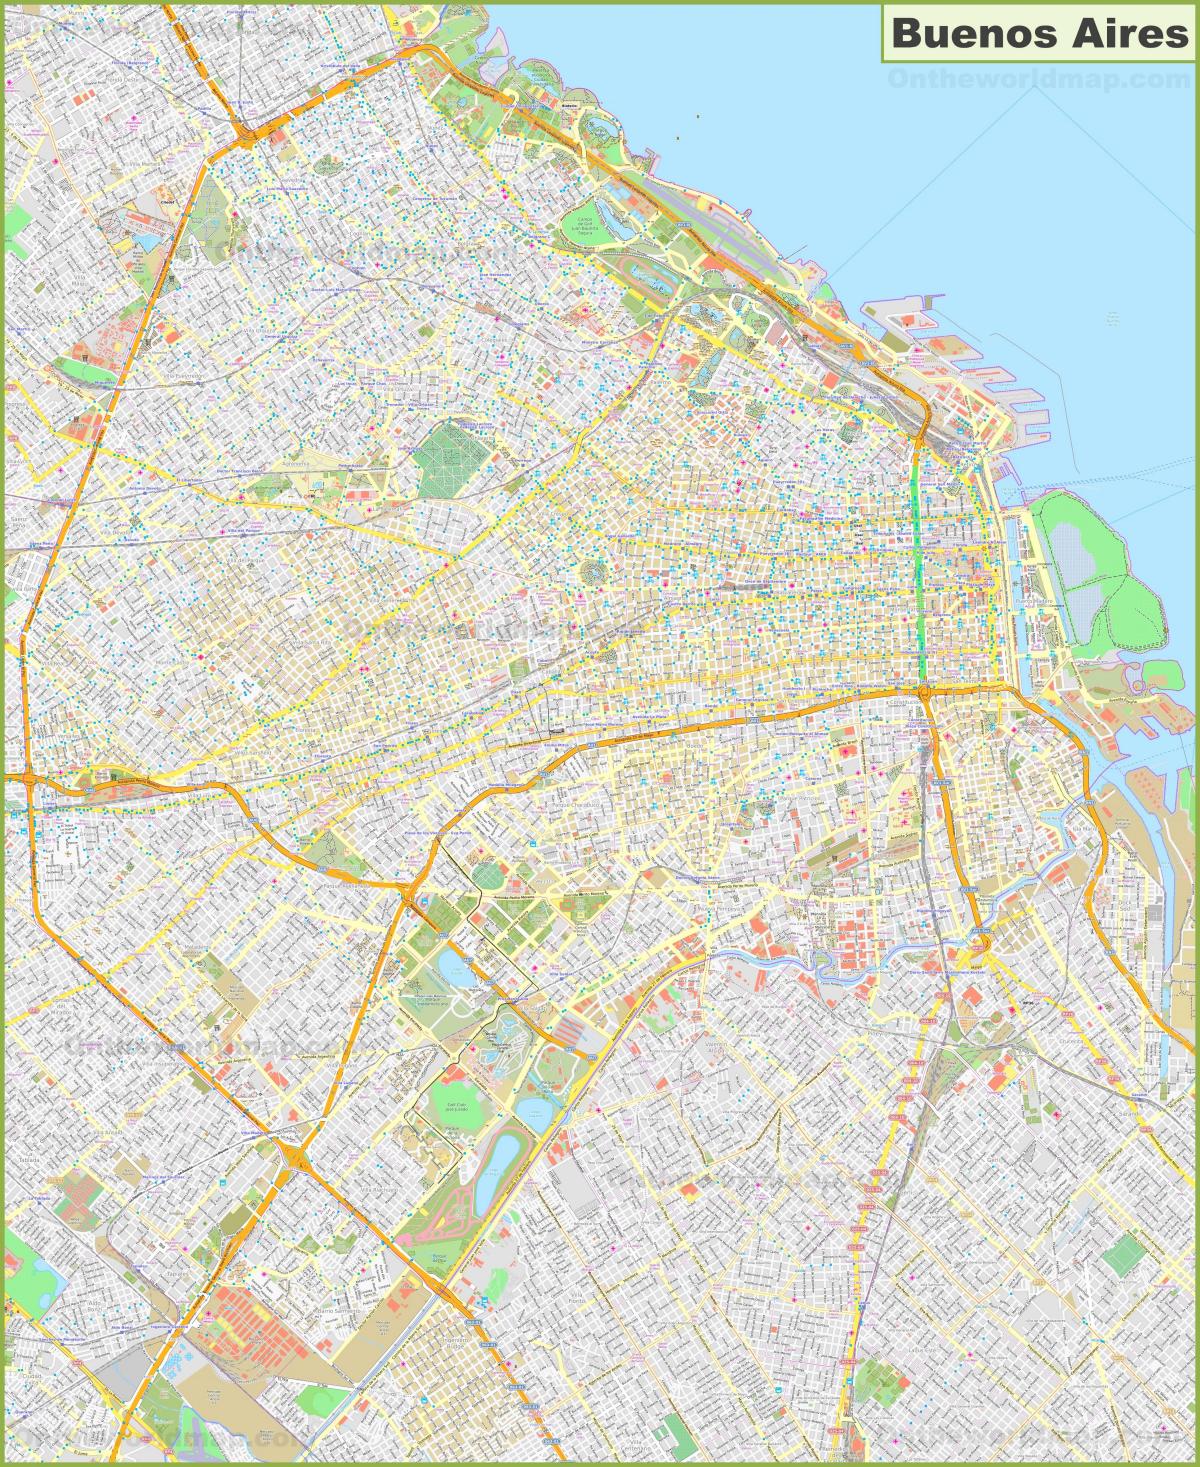 Mappa stradale di Buenos Aires